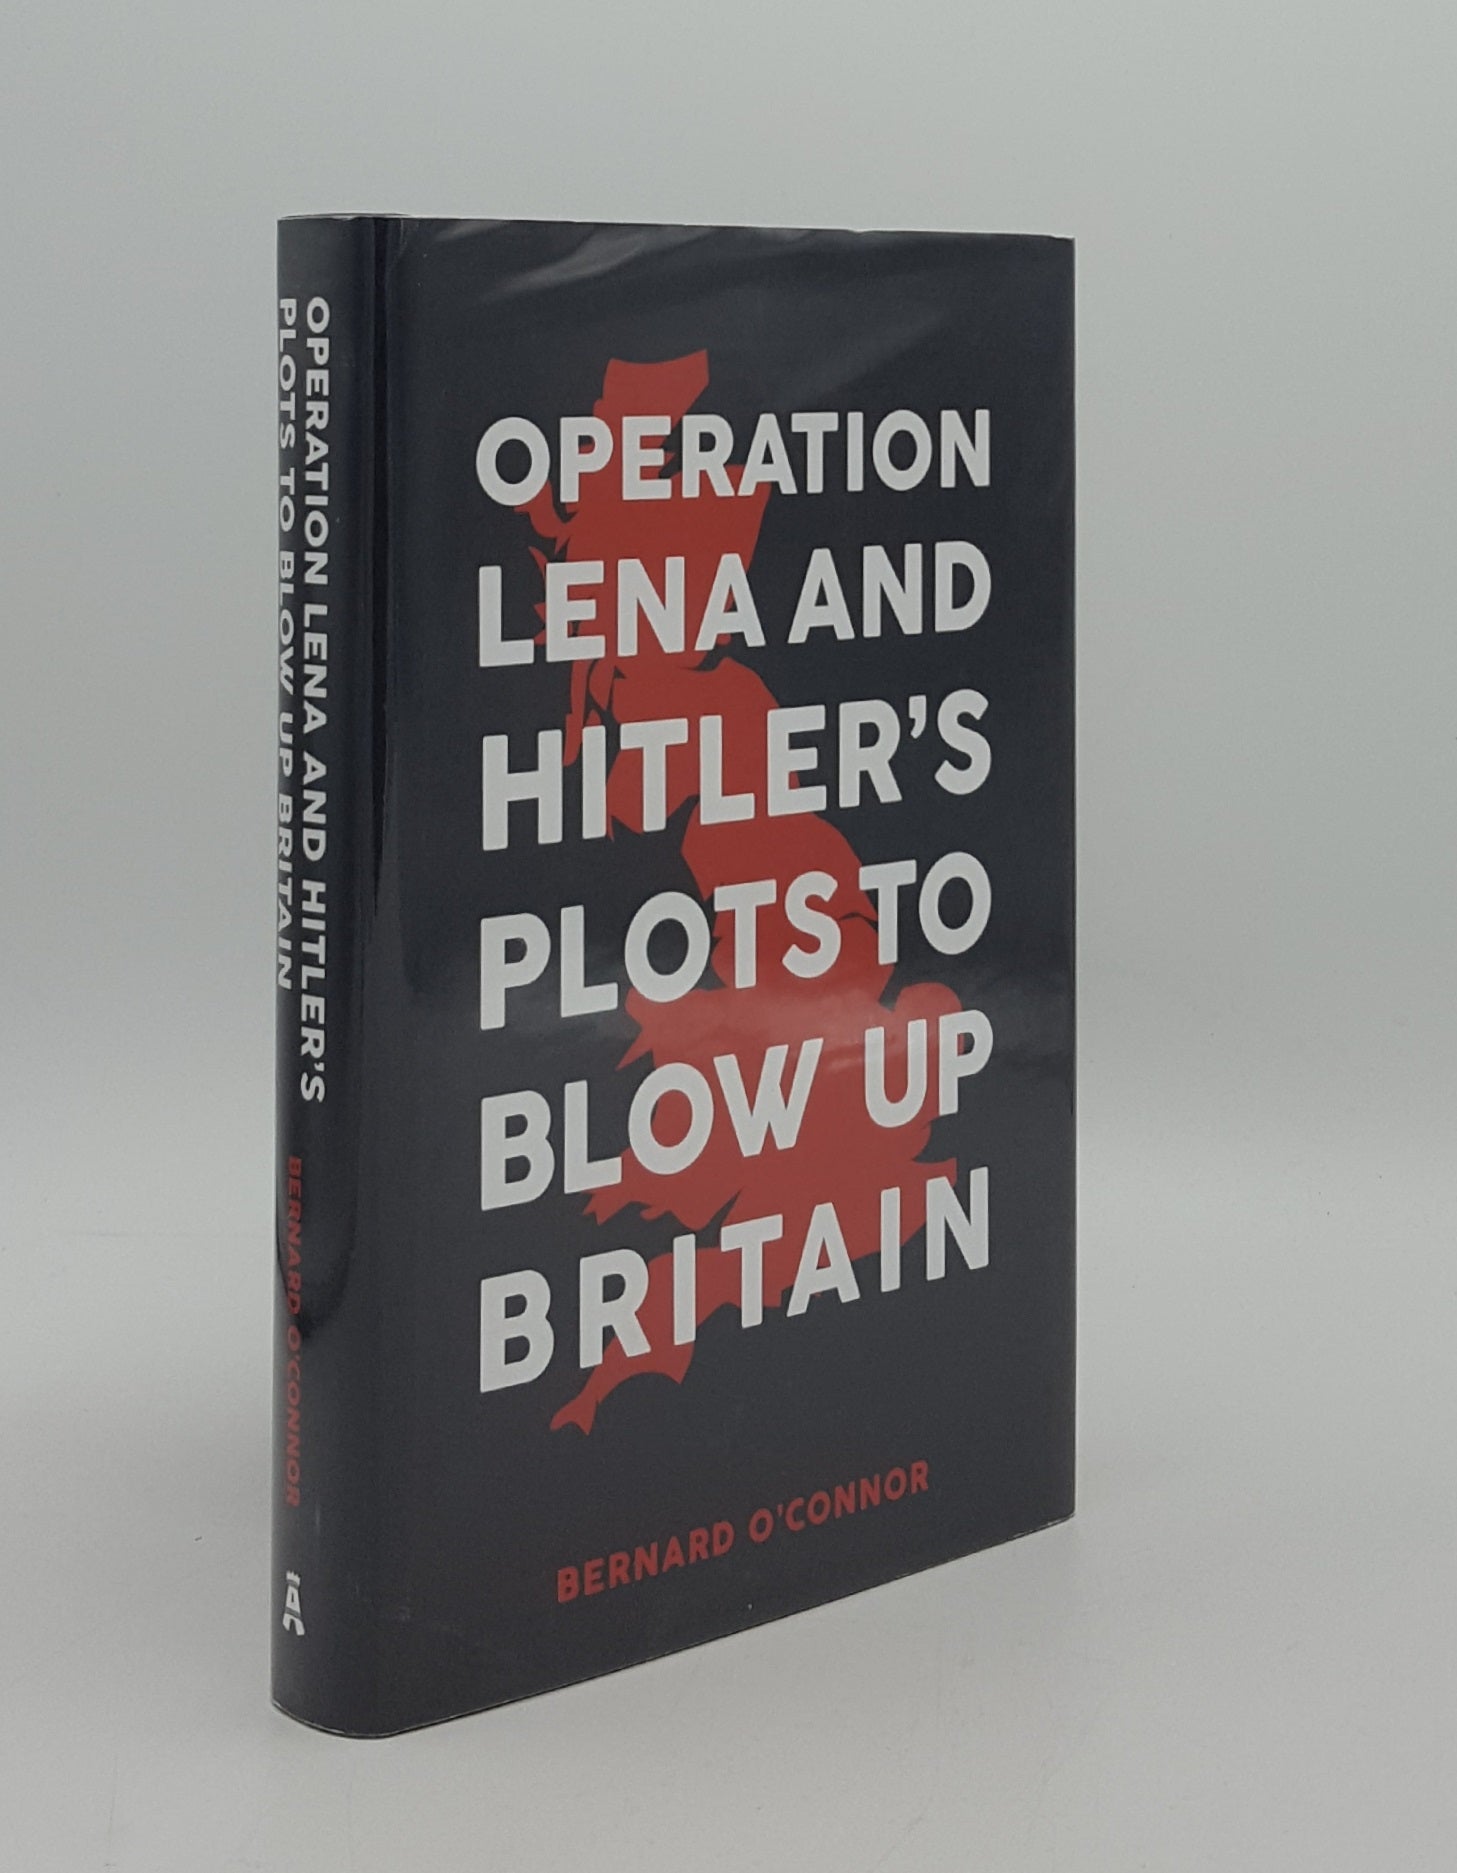 O'CONNOR Bernard - Operation Lena and Hitler's Plots to Blow Up Britain